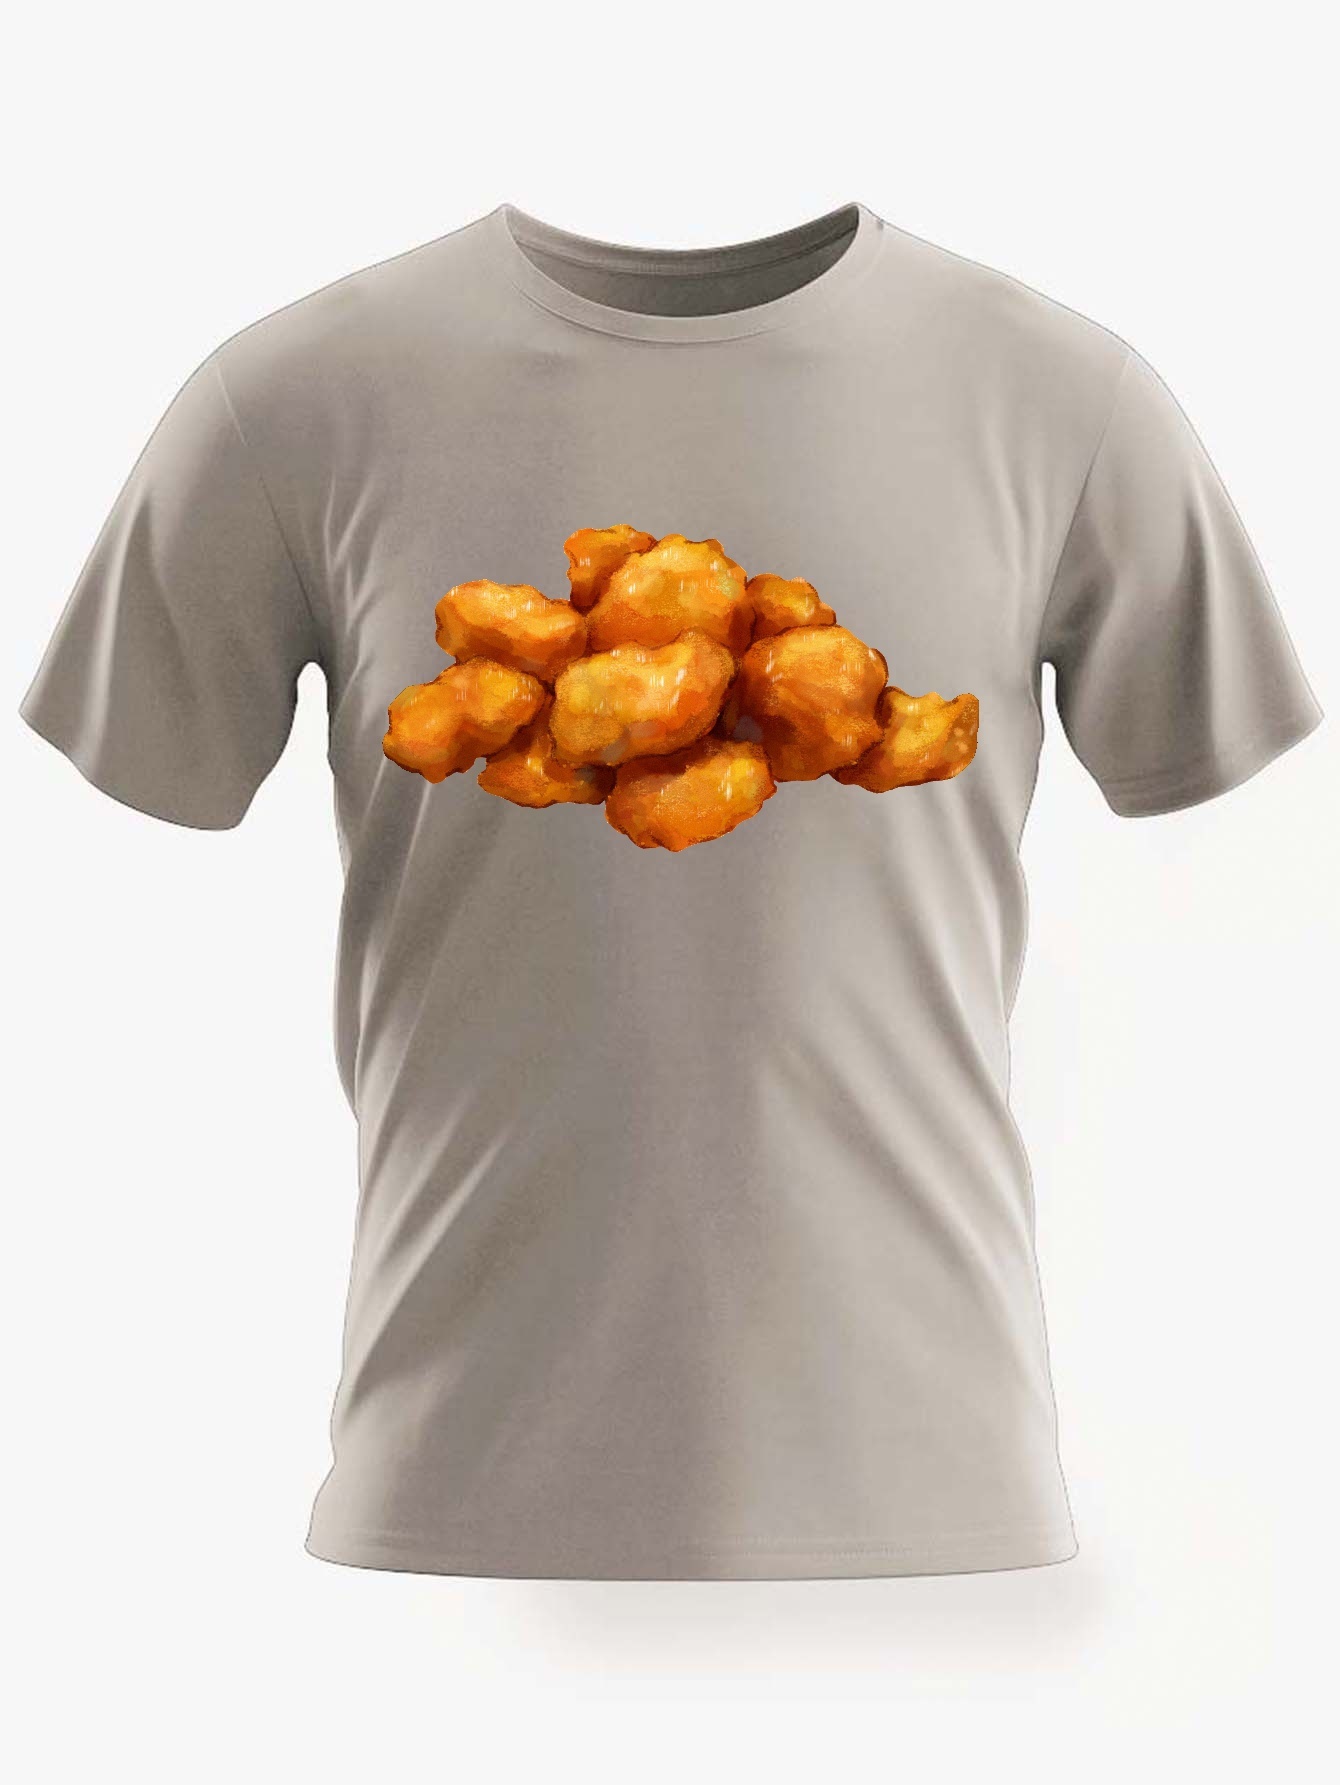 Chicken Nuggets Pattern Print Men's Comfy T-shirt, Graphic Tee